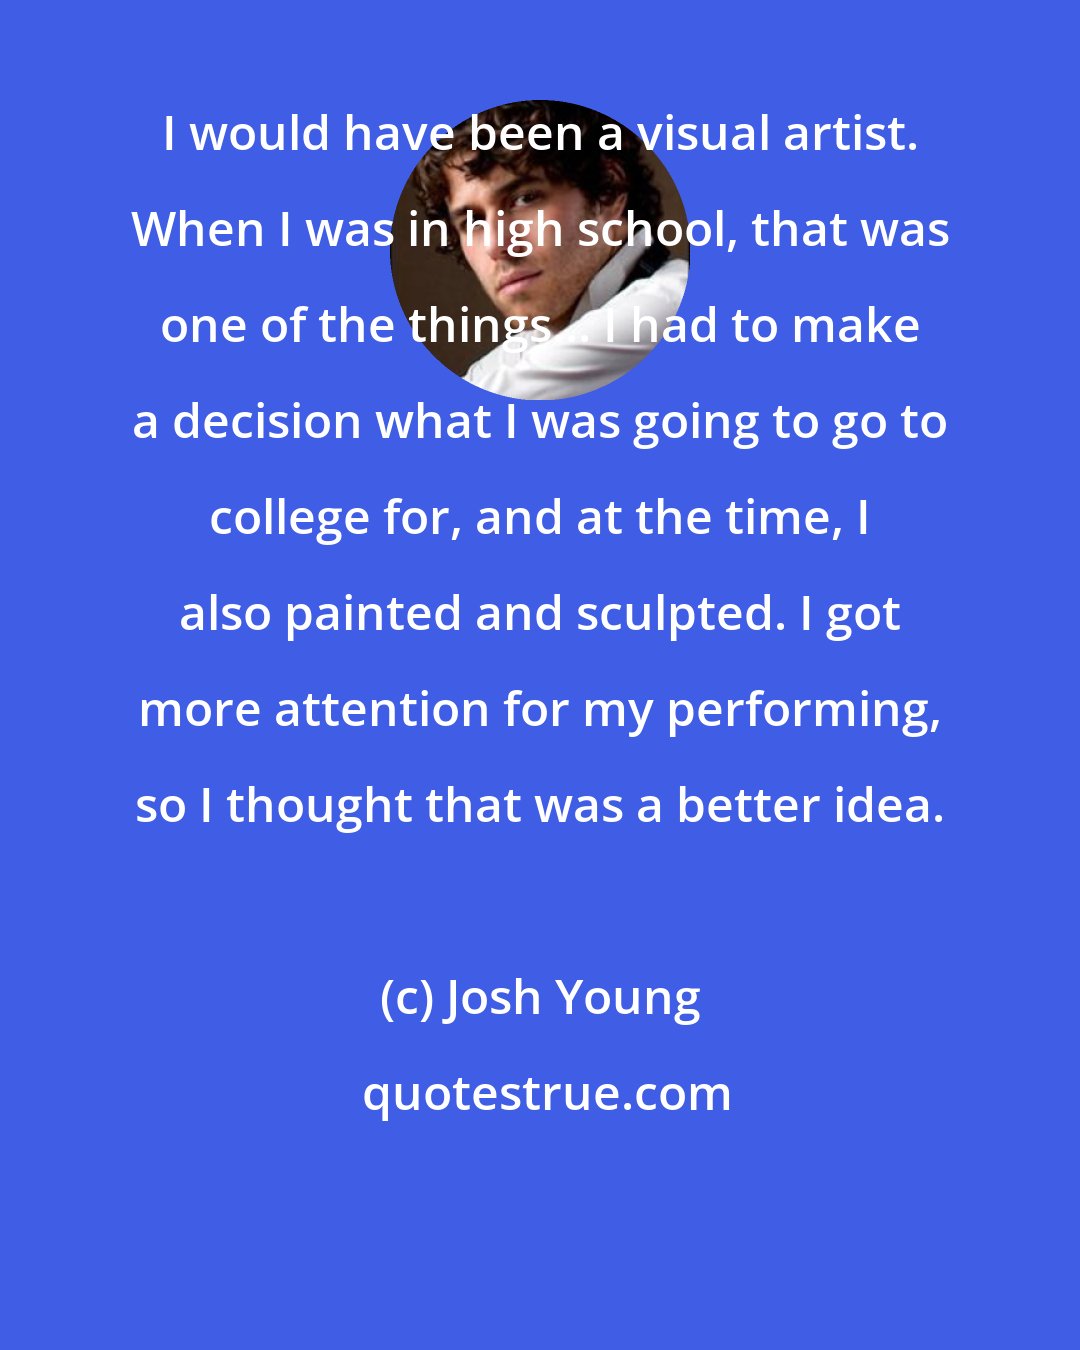 Josh Young: I would have been a visual artist. When I was in high school, that was one of the things... I had to make a decision what I was going to go to college for, and at the time, I also painted and sculpted. I got more attention for my performing, so I thought that was a better idea.